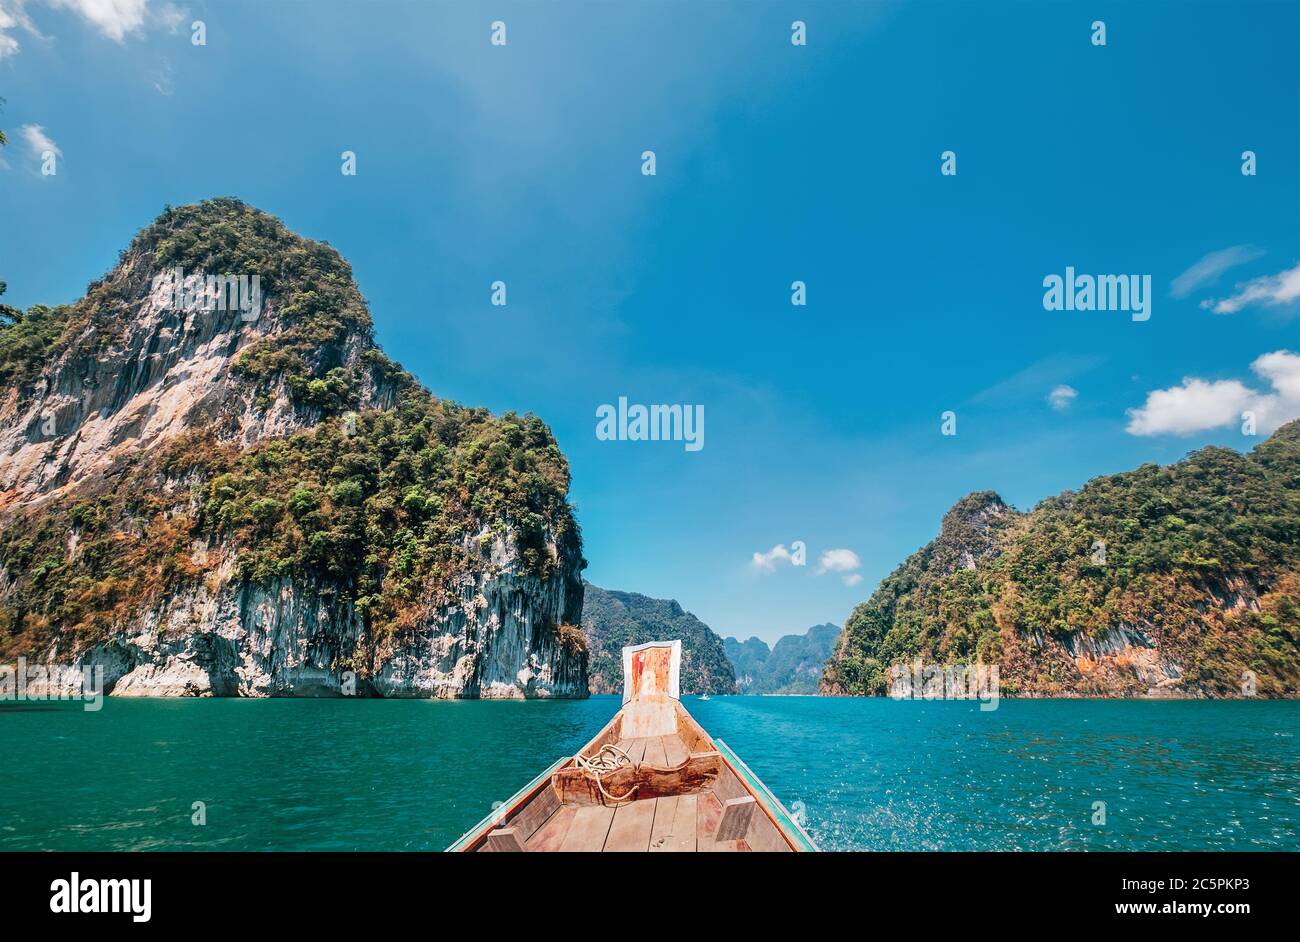 Nose of wooden motorboat view, vessel sailing on Thai Khao Sok Lake with foresty mountains around Stock Photo